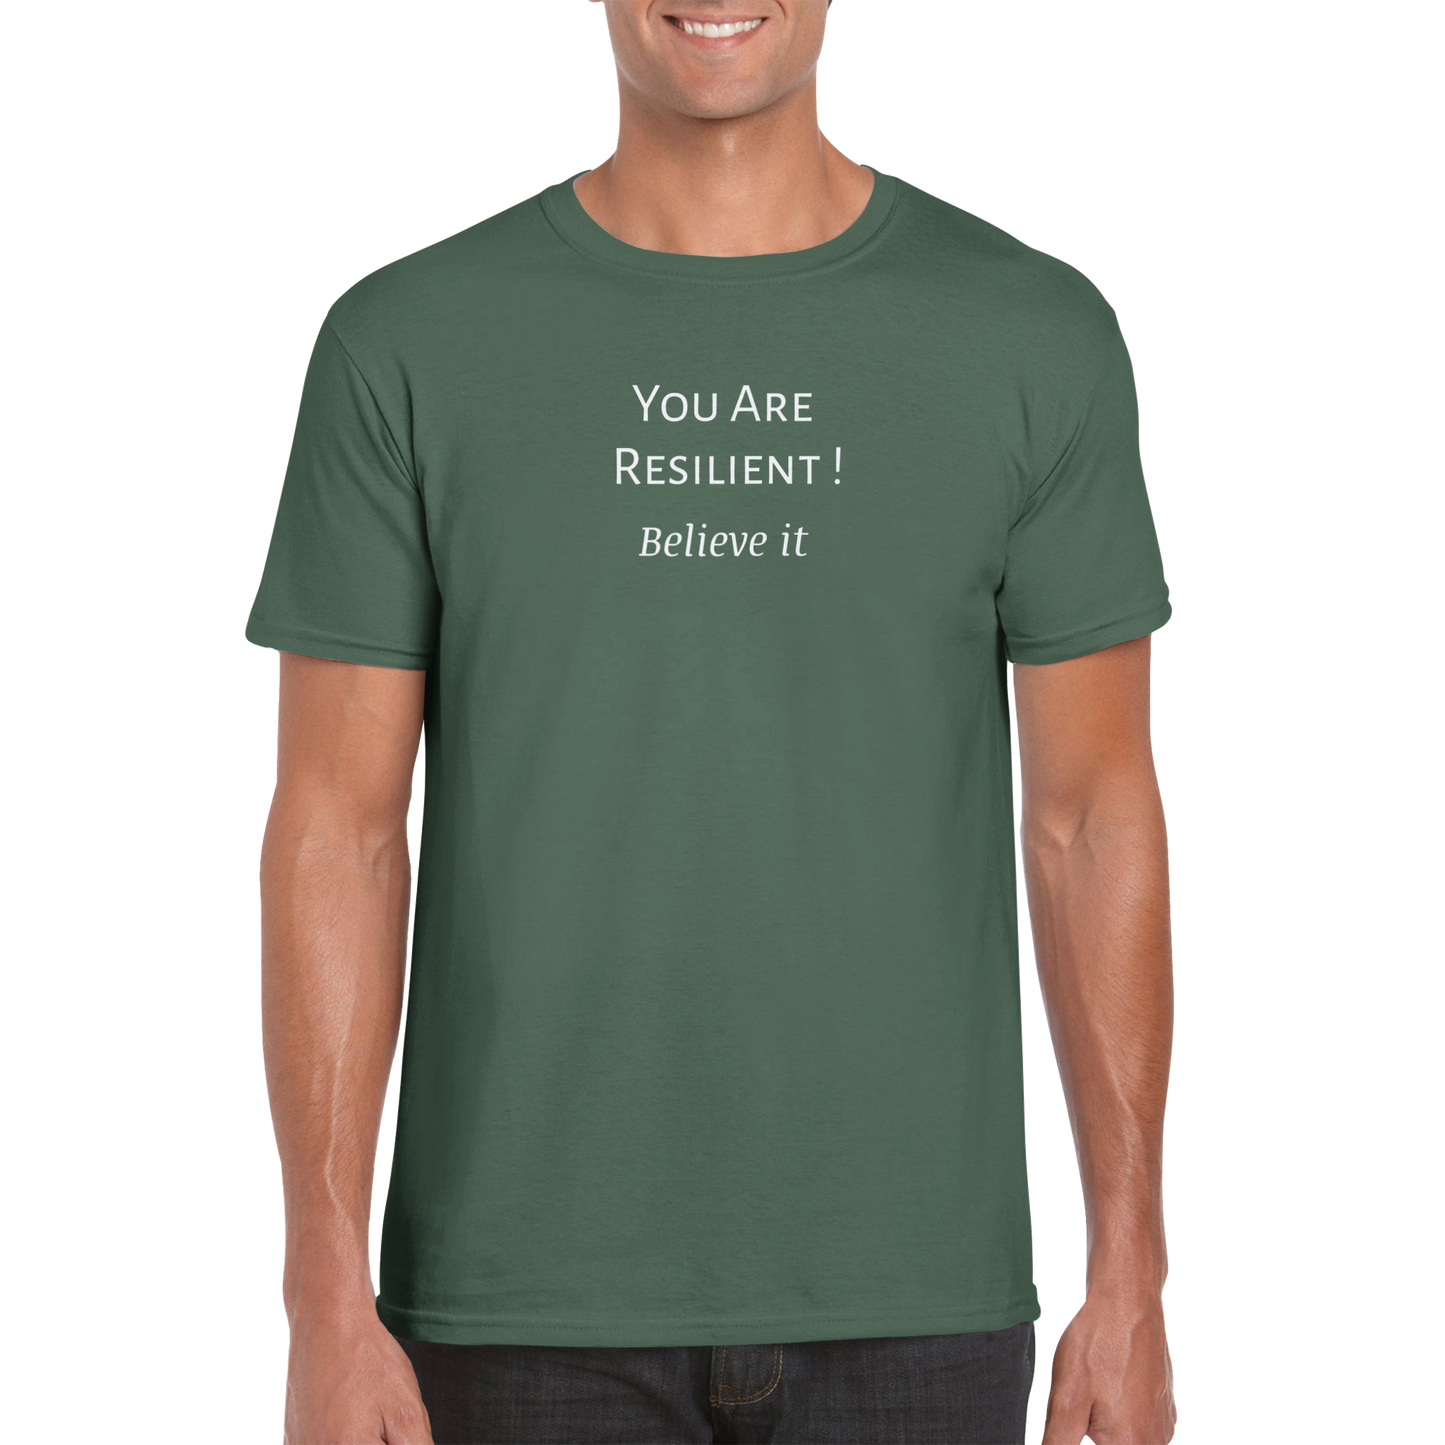 You Are Resilient! Classic Unisex Crewneck T-shirt. Wear it and share it forward.